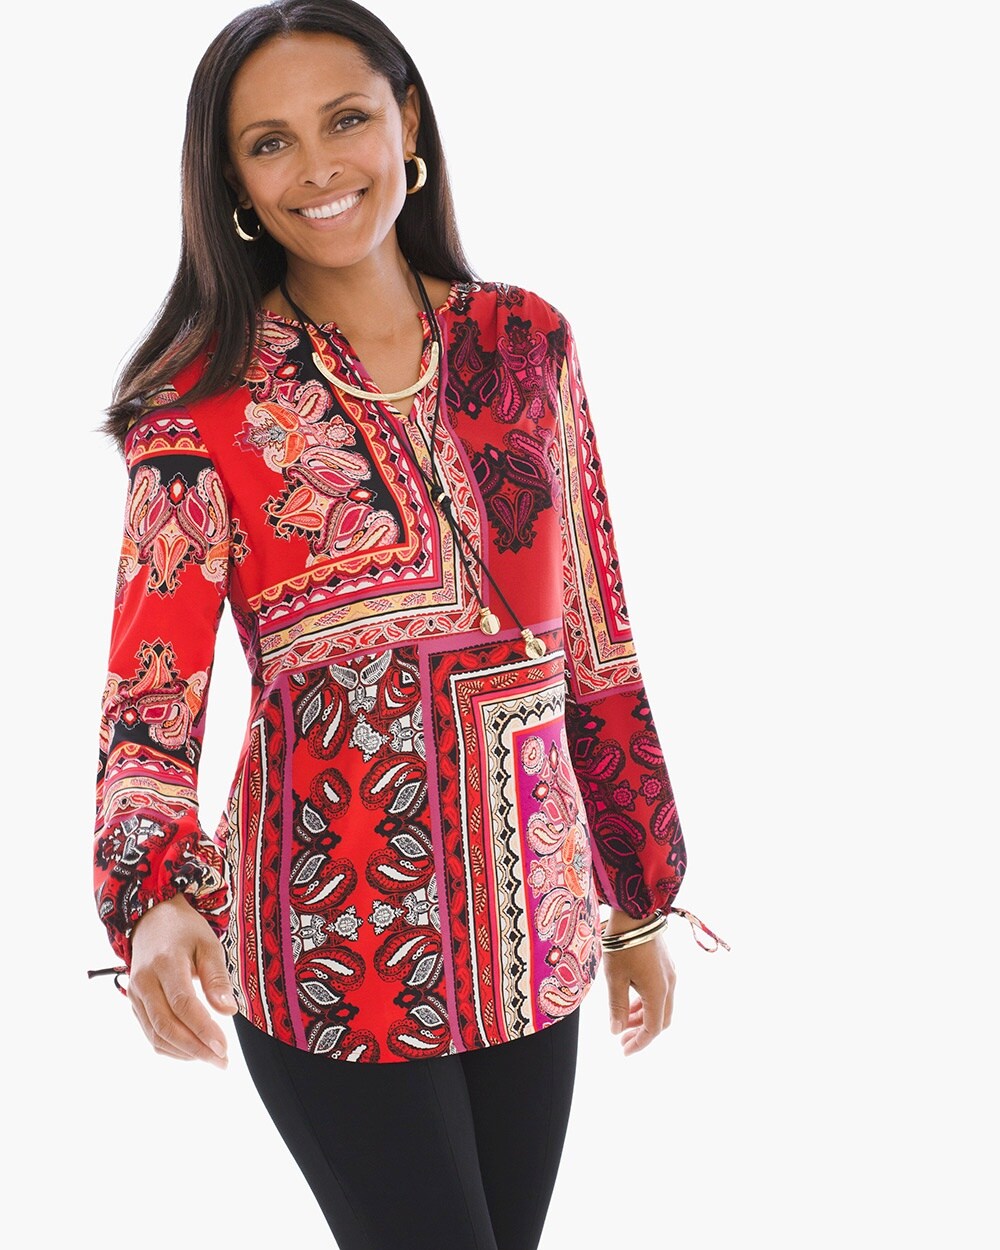 Patched Paisley Peasant Top - Chico's